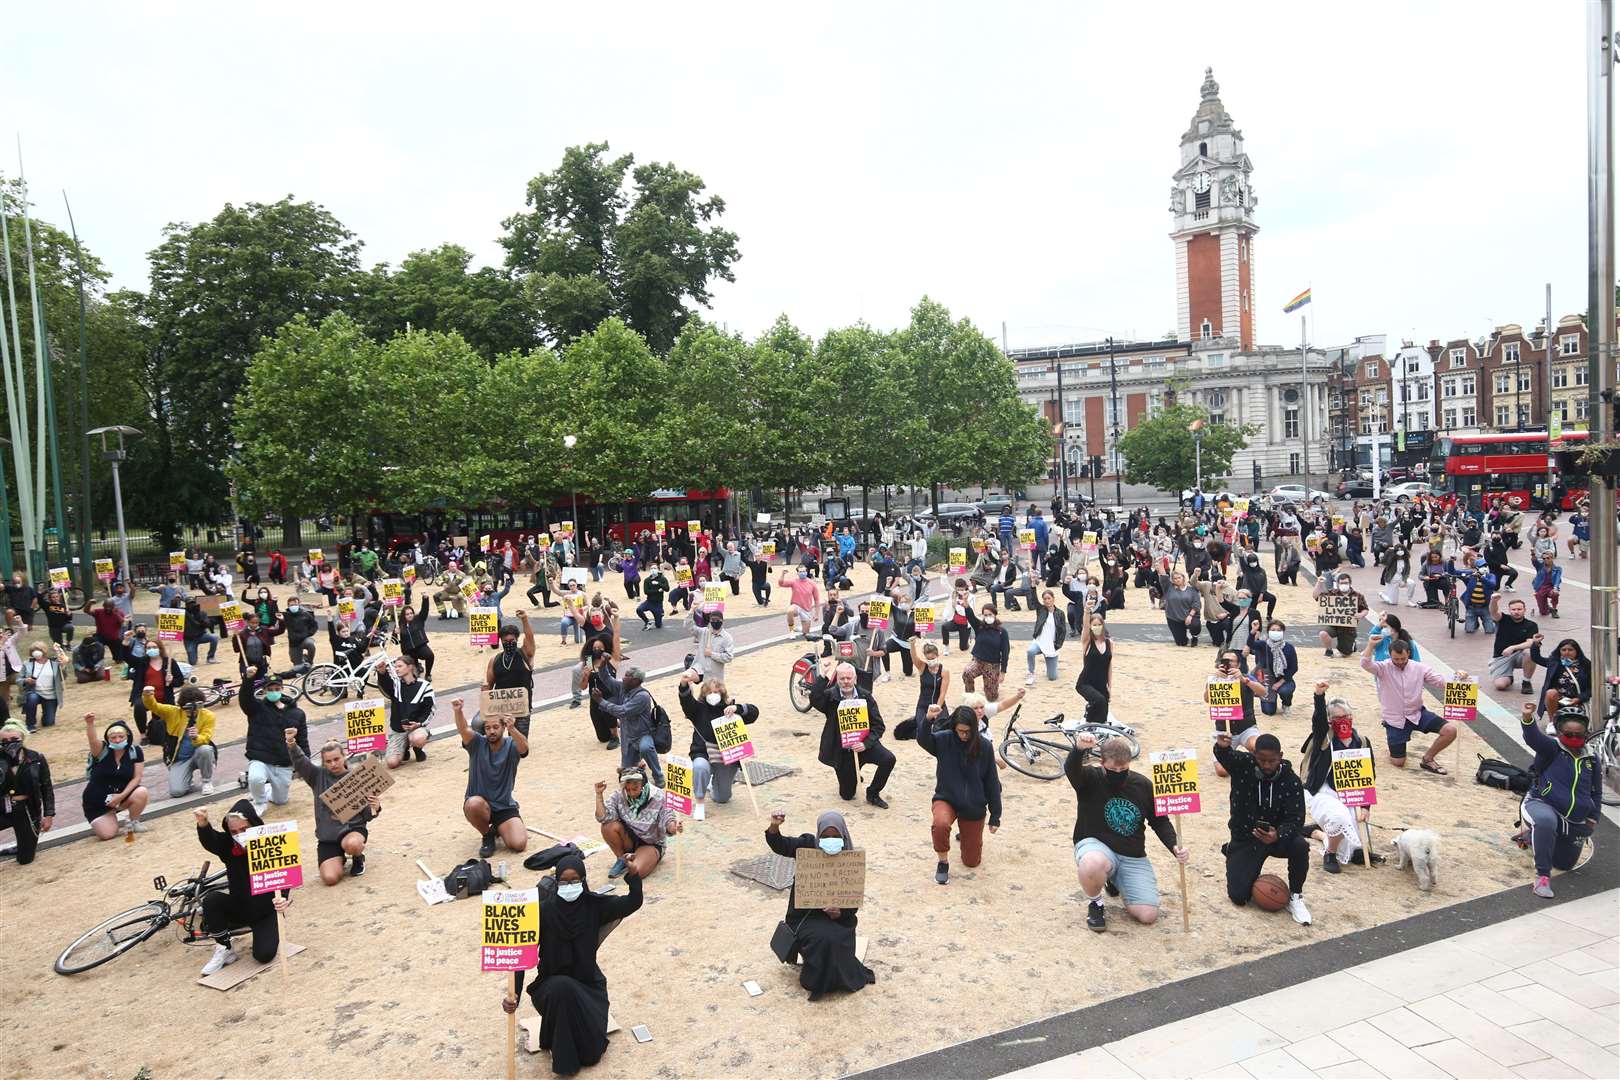 People kneel during a Black Lives Matter protest rally at Windrush Square, Brixton (Yui Mok/PA)